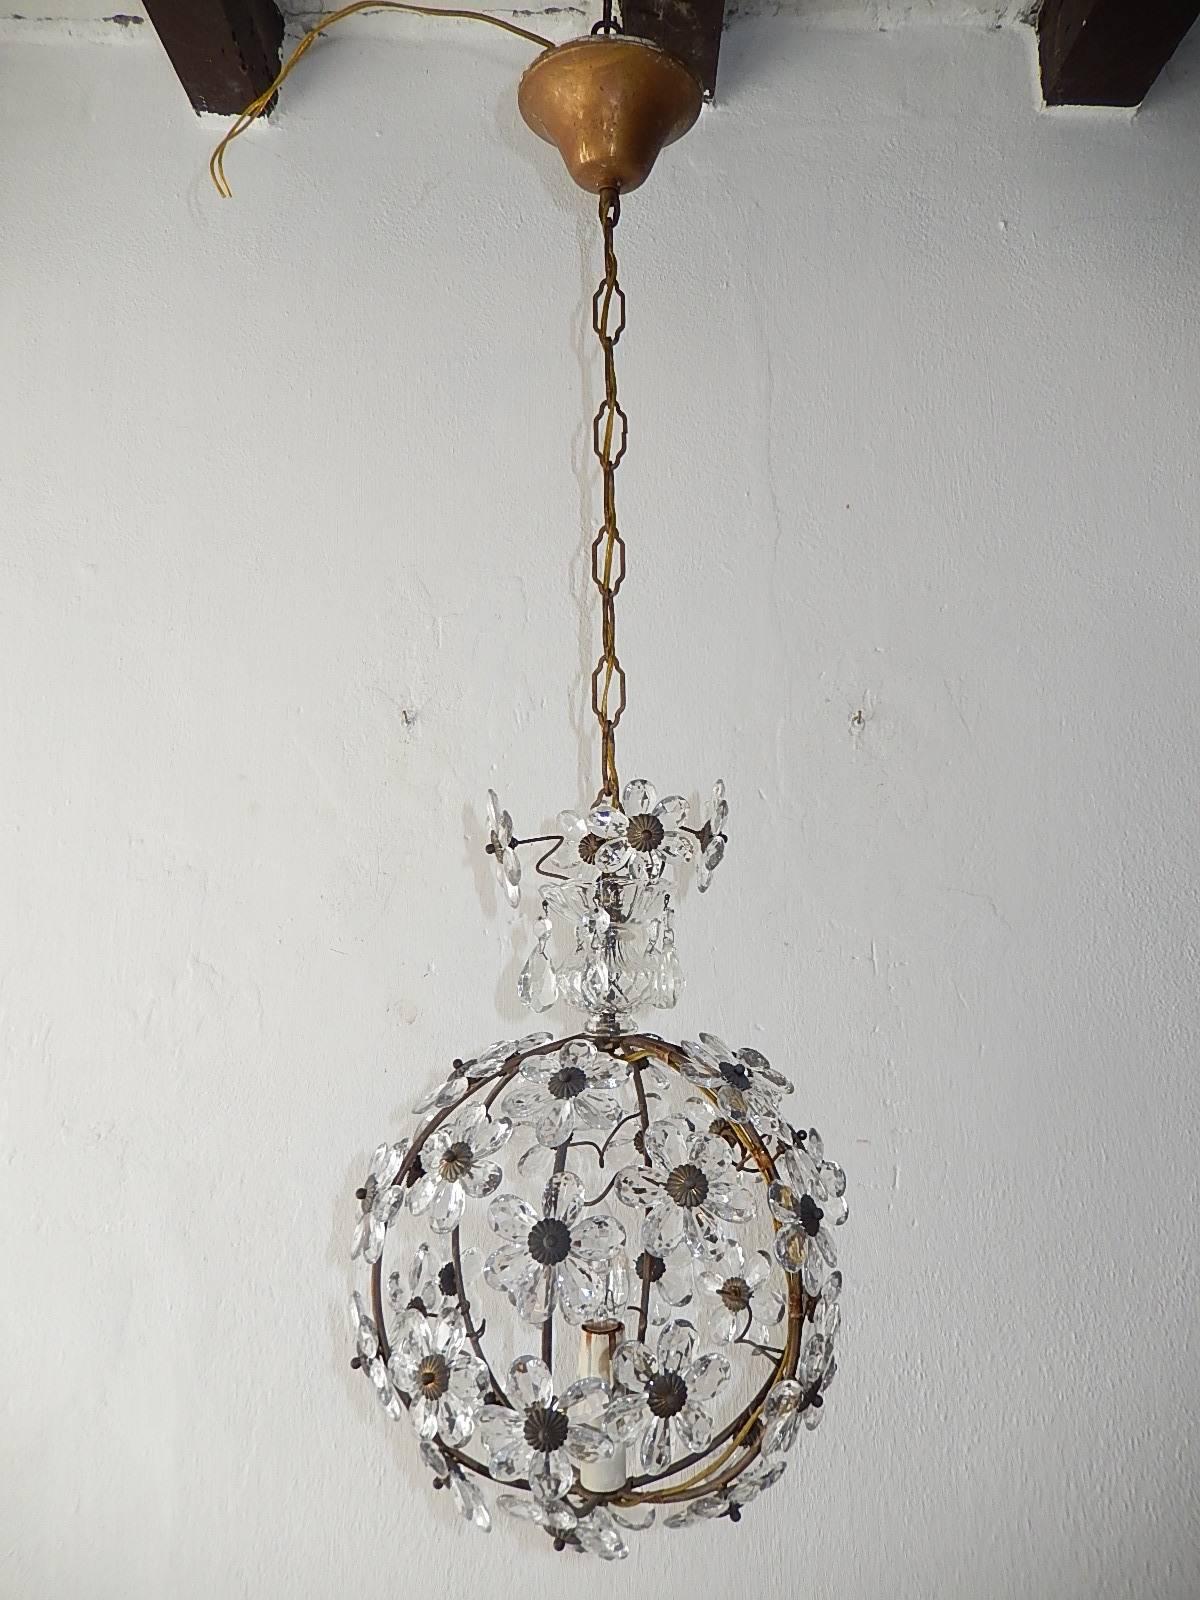 Housing one light. Rewired and ready to hang. Clear crystal prisms. Murano glass and crystal bobeches on top with crystal prisms in clear. Adding another 17 inches of original chain and canopy. Free priority shipping from Italy.